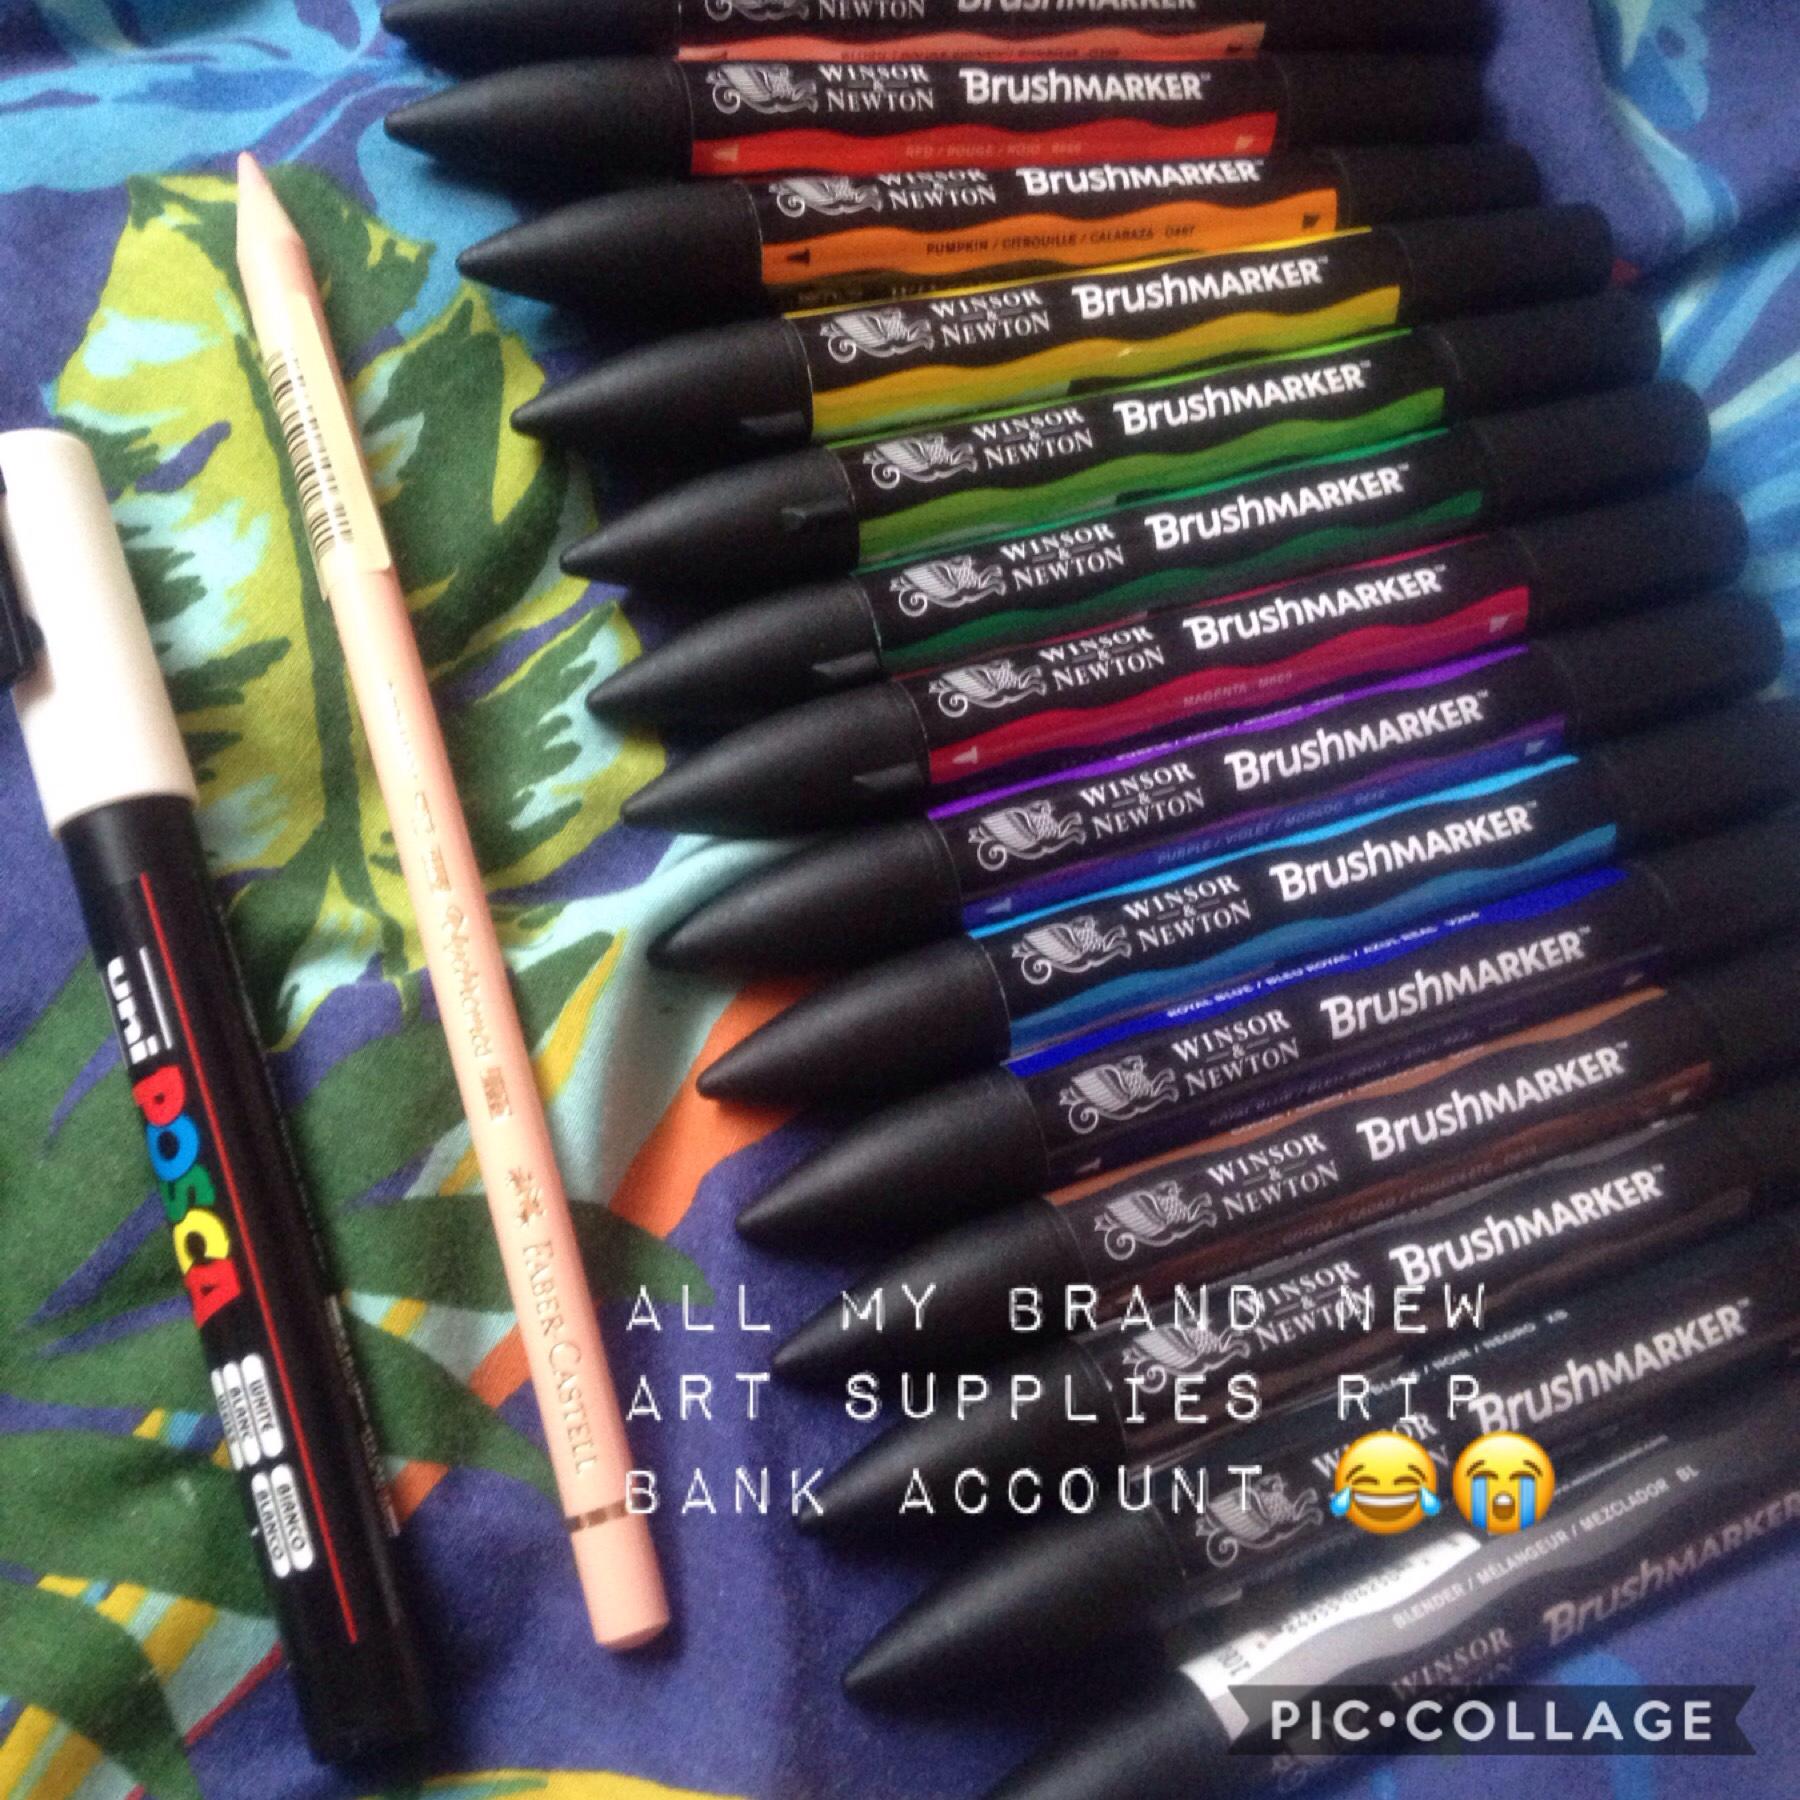 Copics are coming soon 😁